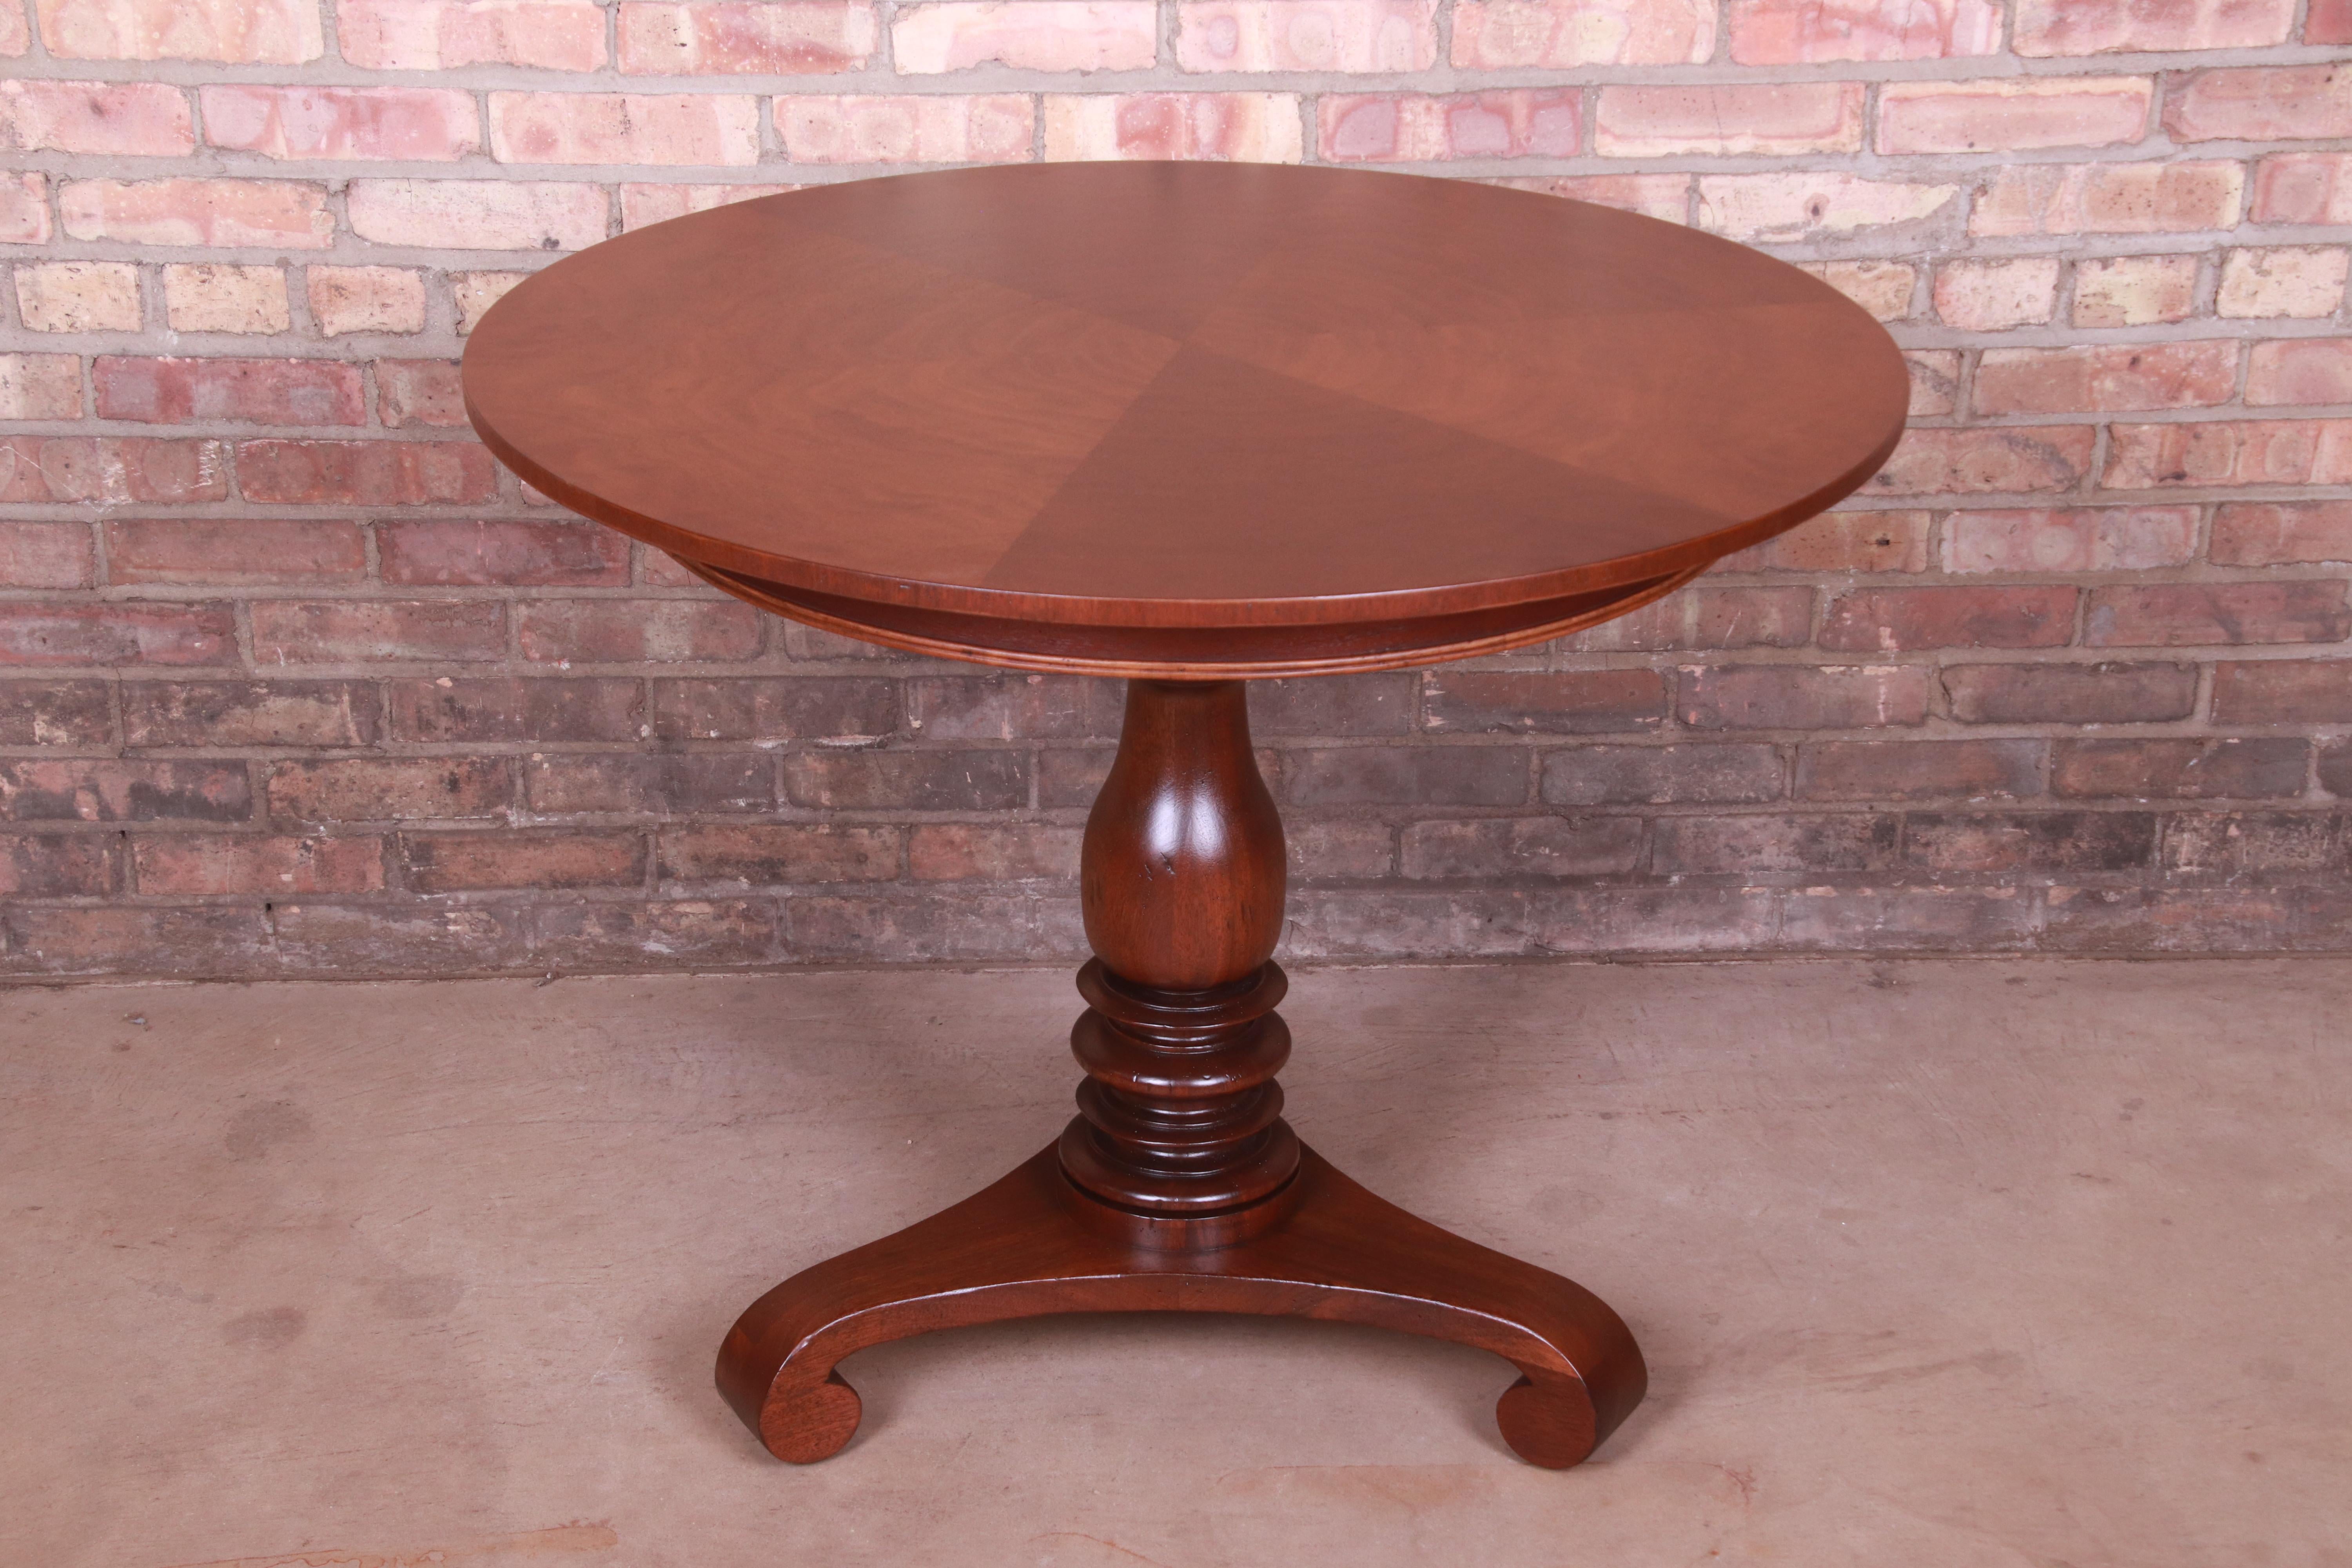 American Baker Furniture Empire Mahogany Pedestal Tea Table or Center Table, Refinished